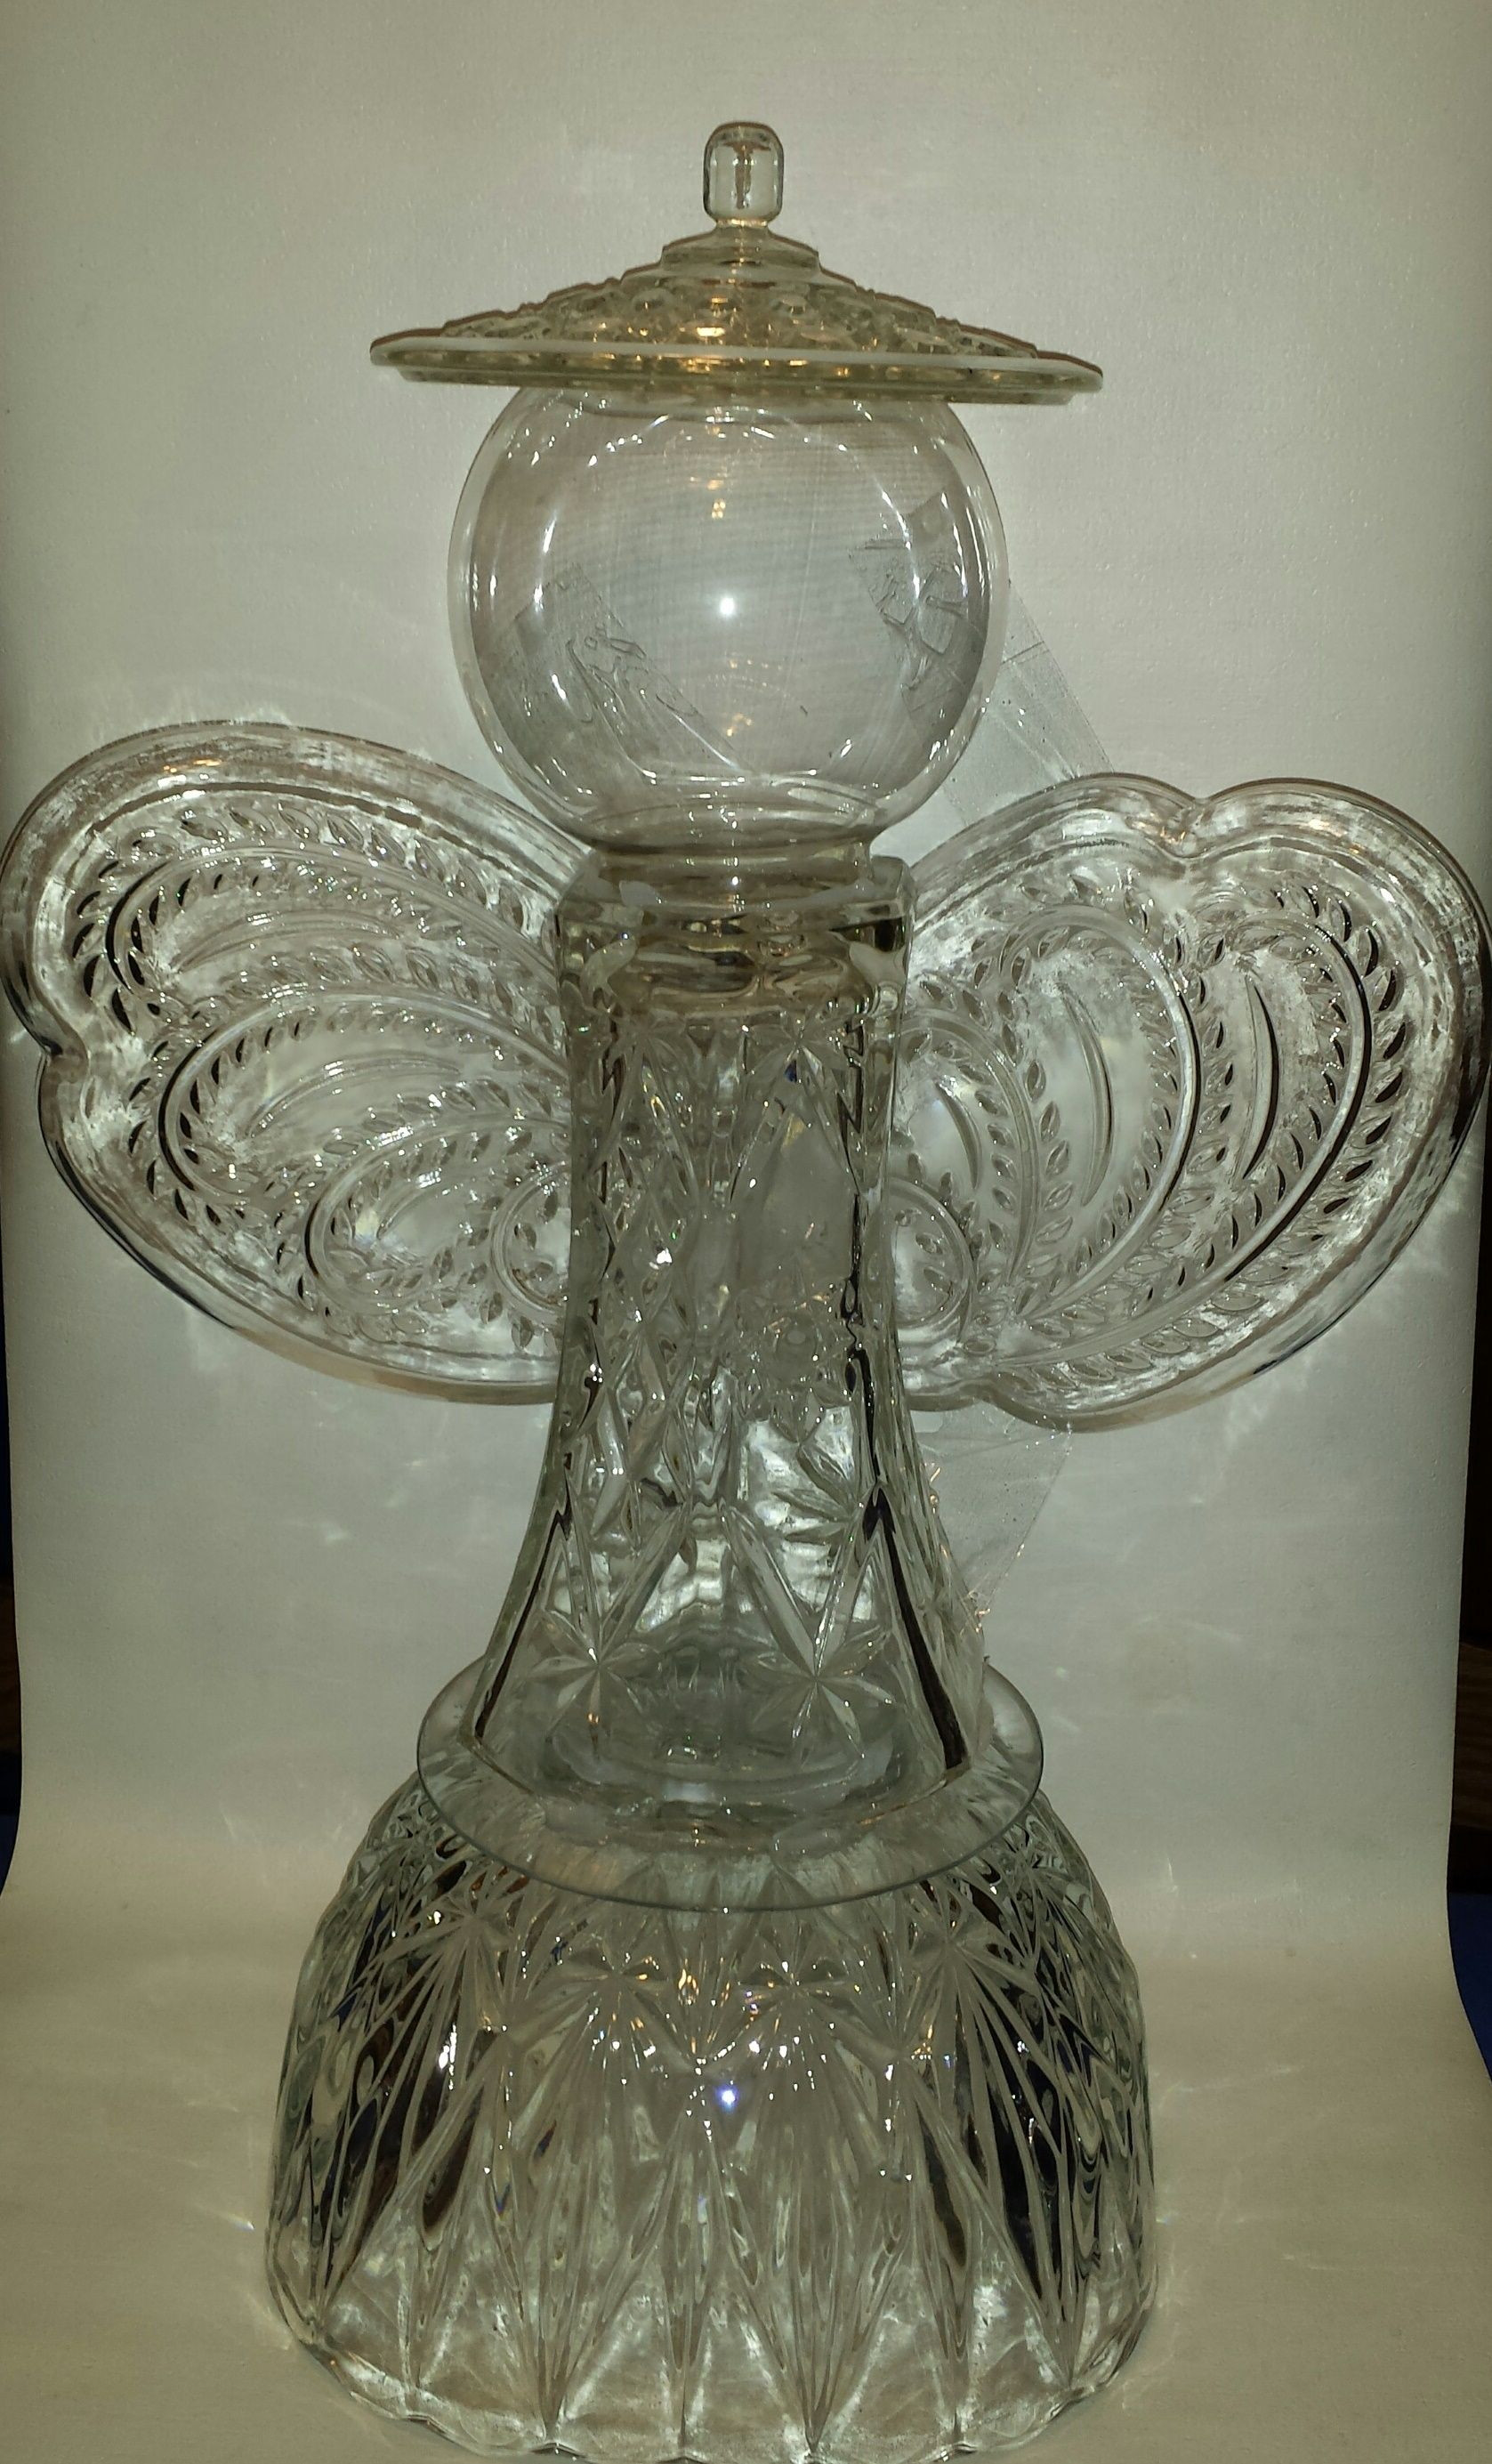 13 Fabulous Glass Angel Flower Vase 2024 free download glass angel flower vase of 24 glass angel i made from punch bowls vases light globes and inside 24 glass angel i made from punch bowls vases light globes and candy